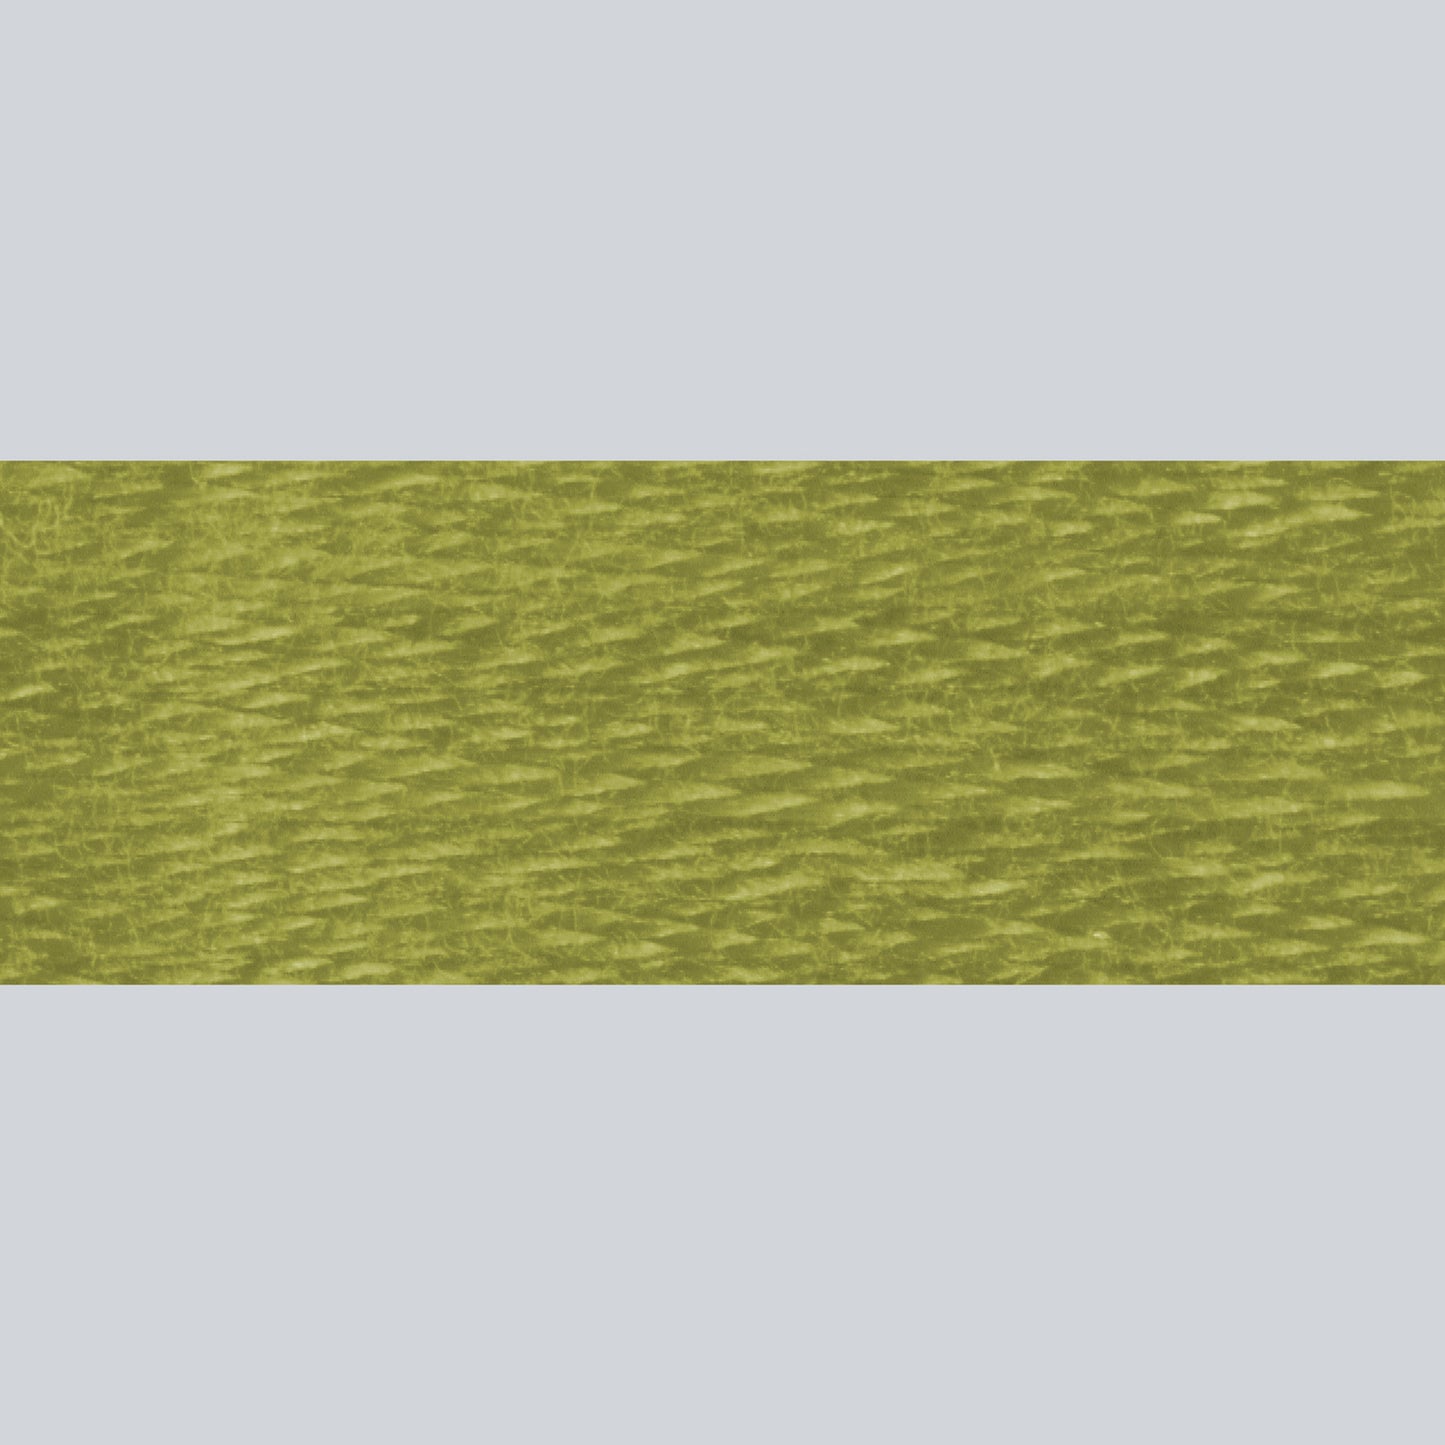 DMC Embroidery Floss - 732 Olive Green Alternative View #1